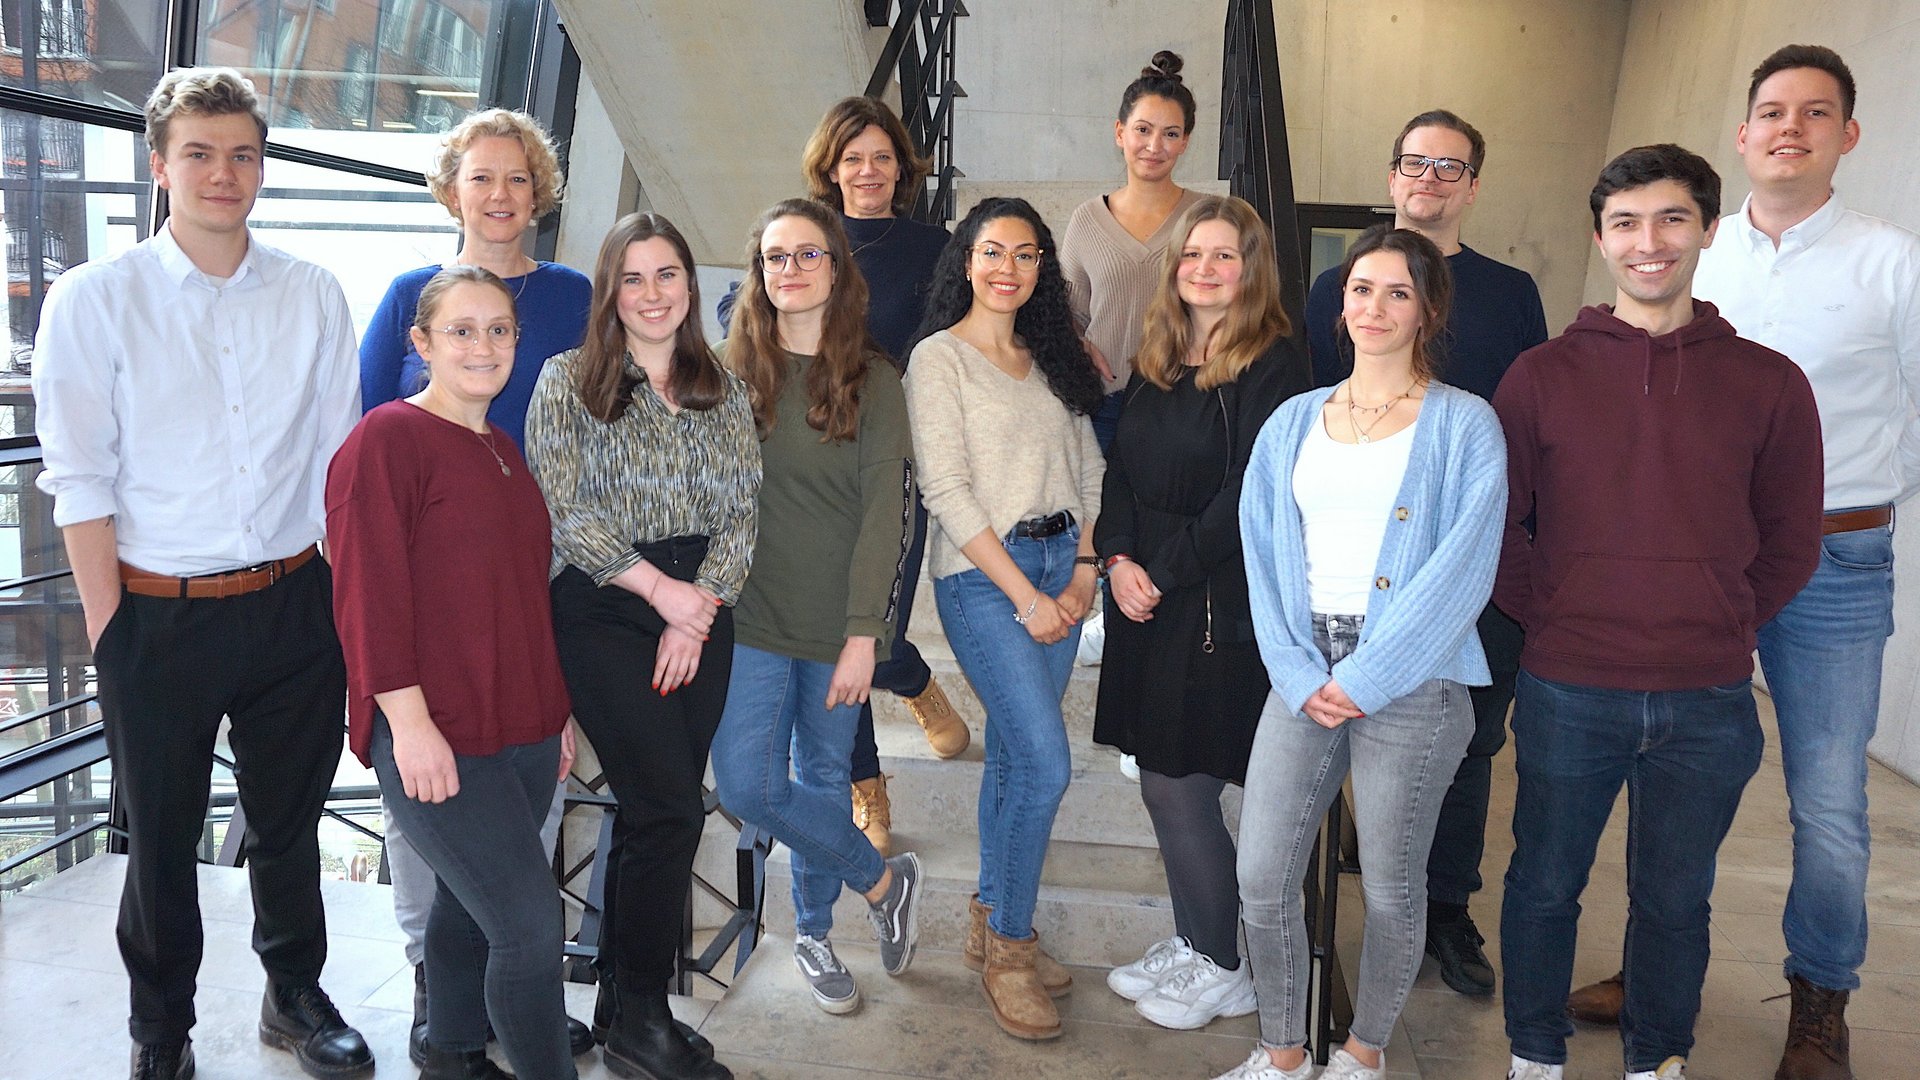 The research group Molecular Infection Immunology stand together with their group leader Hanna Lotter in the stairwell of the new bnitm building.